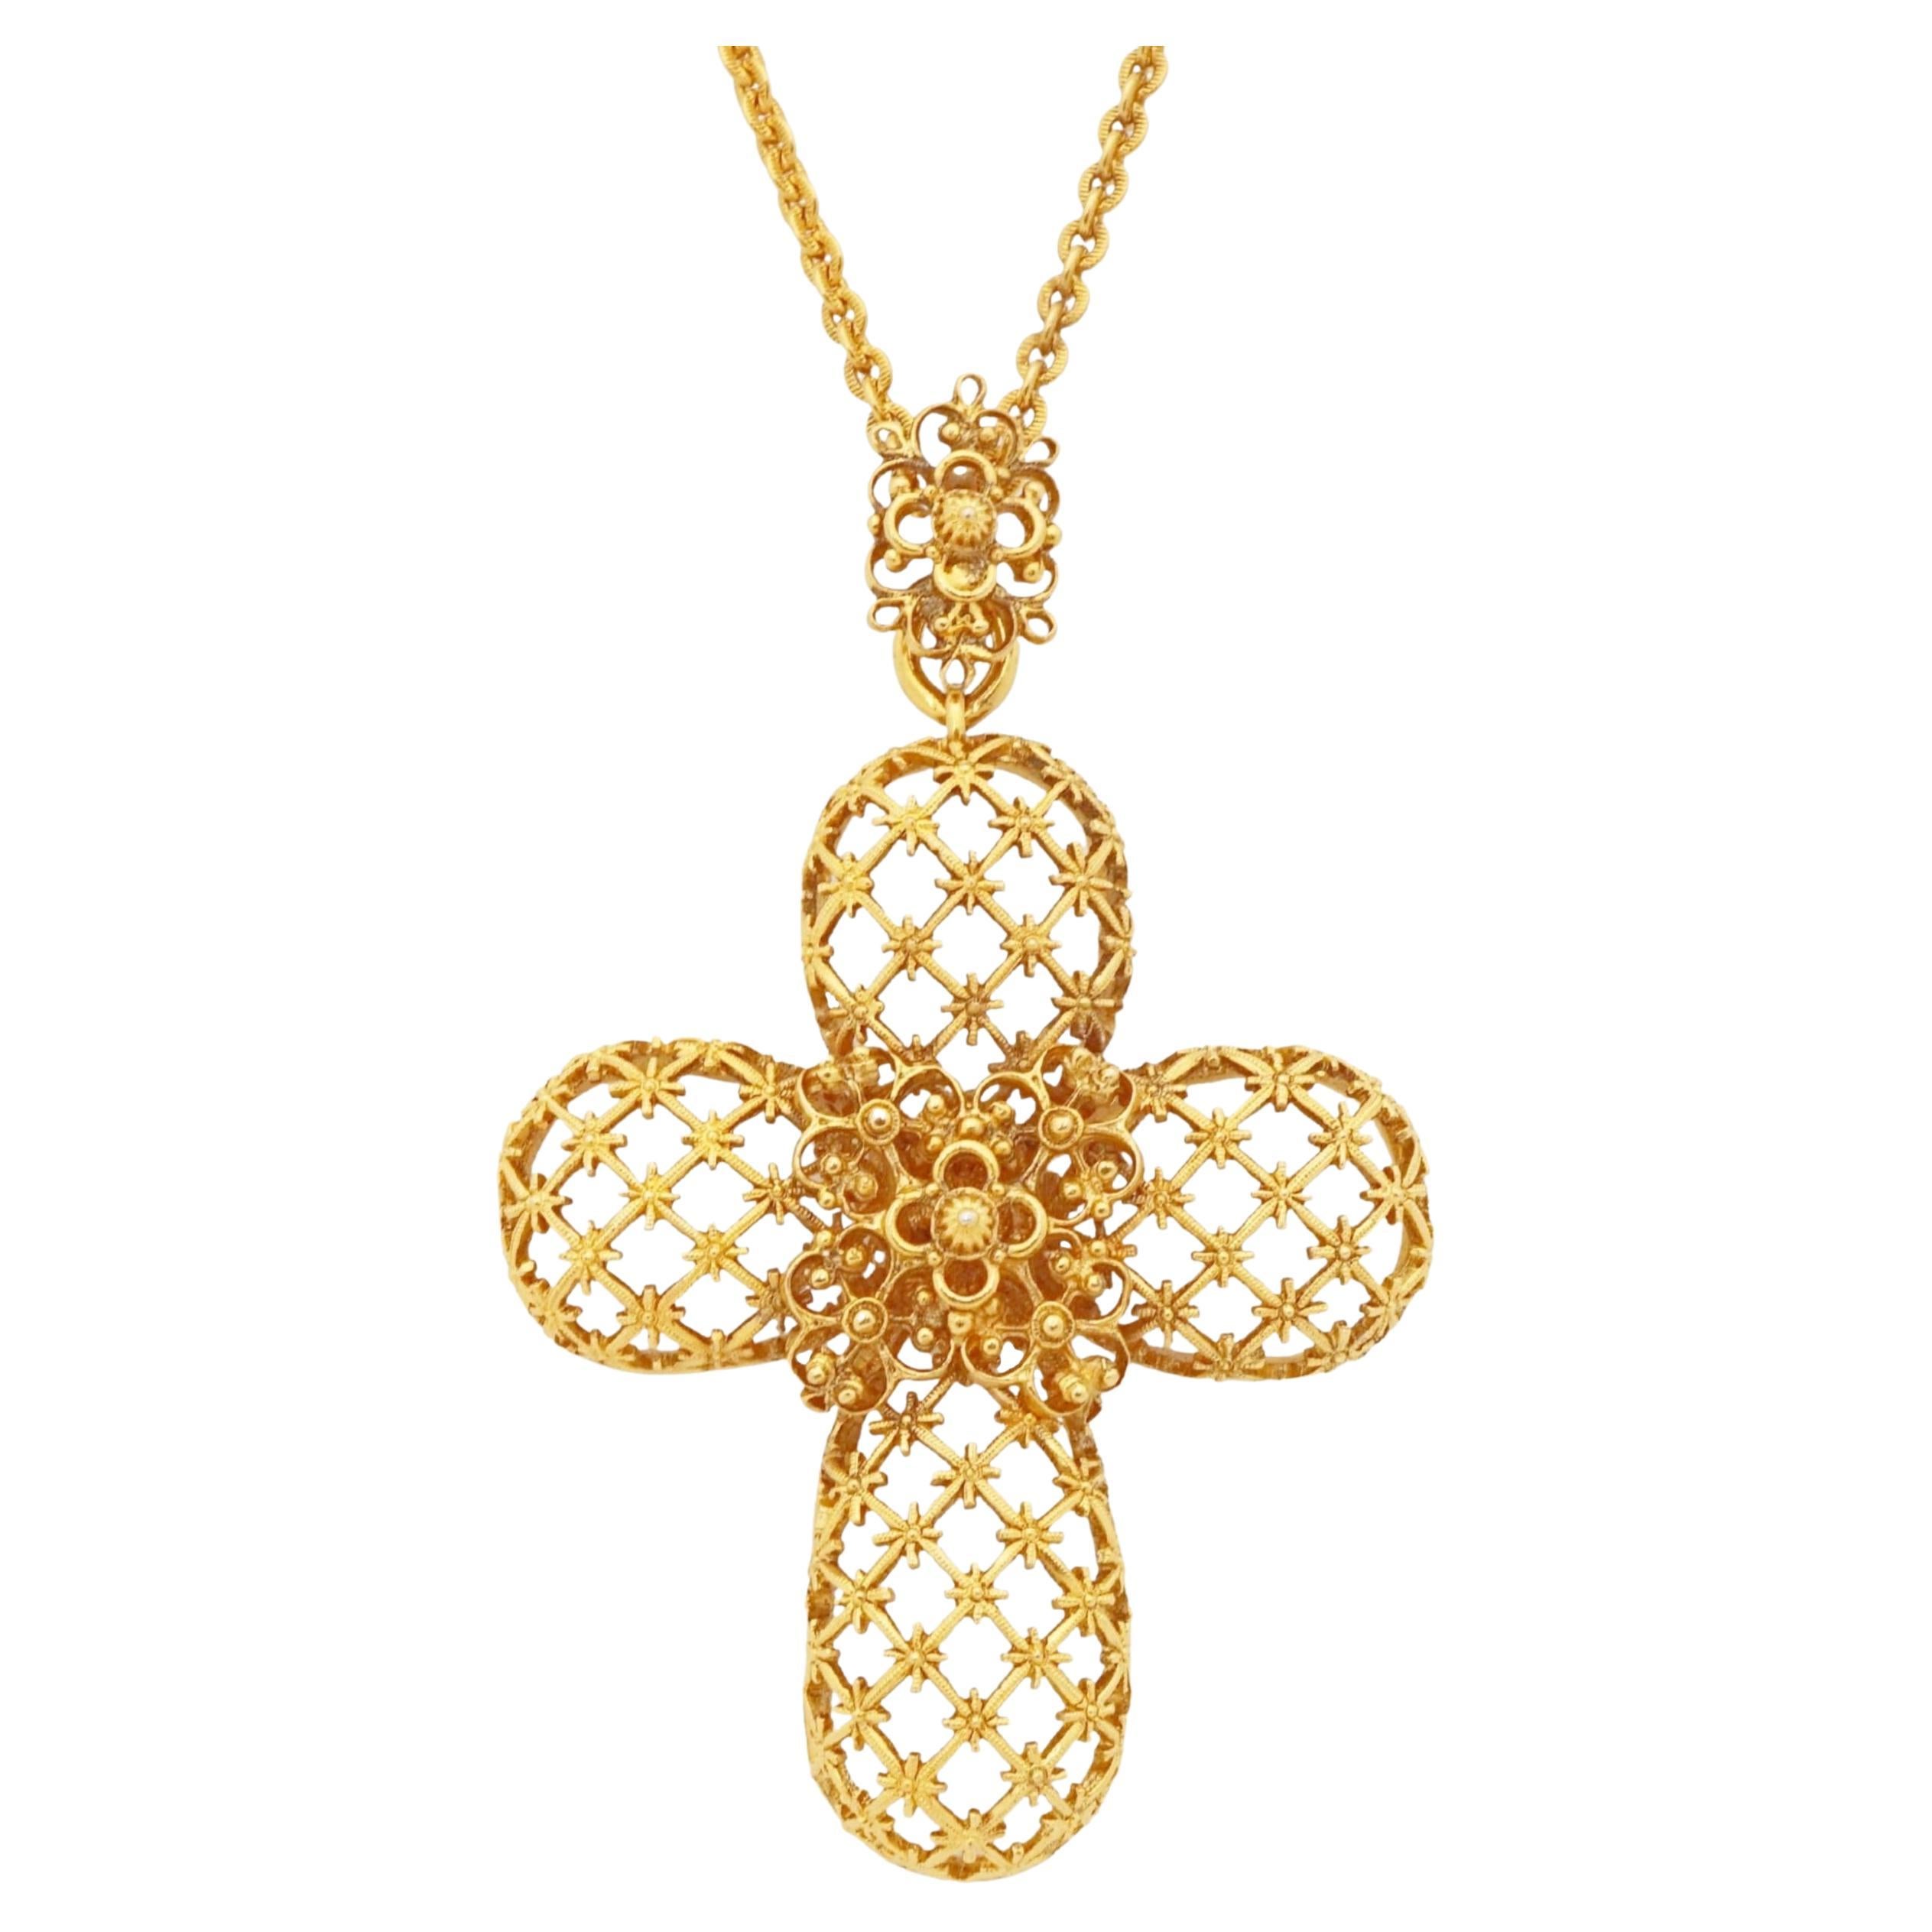 Gilded Filigree Cross Pendant Statement Necklace By Jose & Maria Barrera, 1990s For Sale